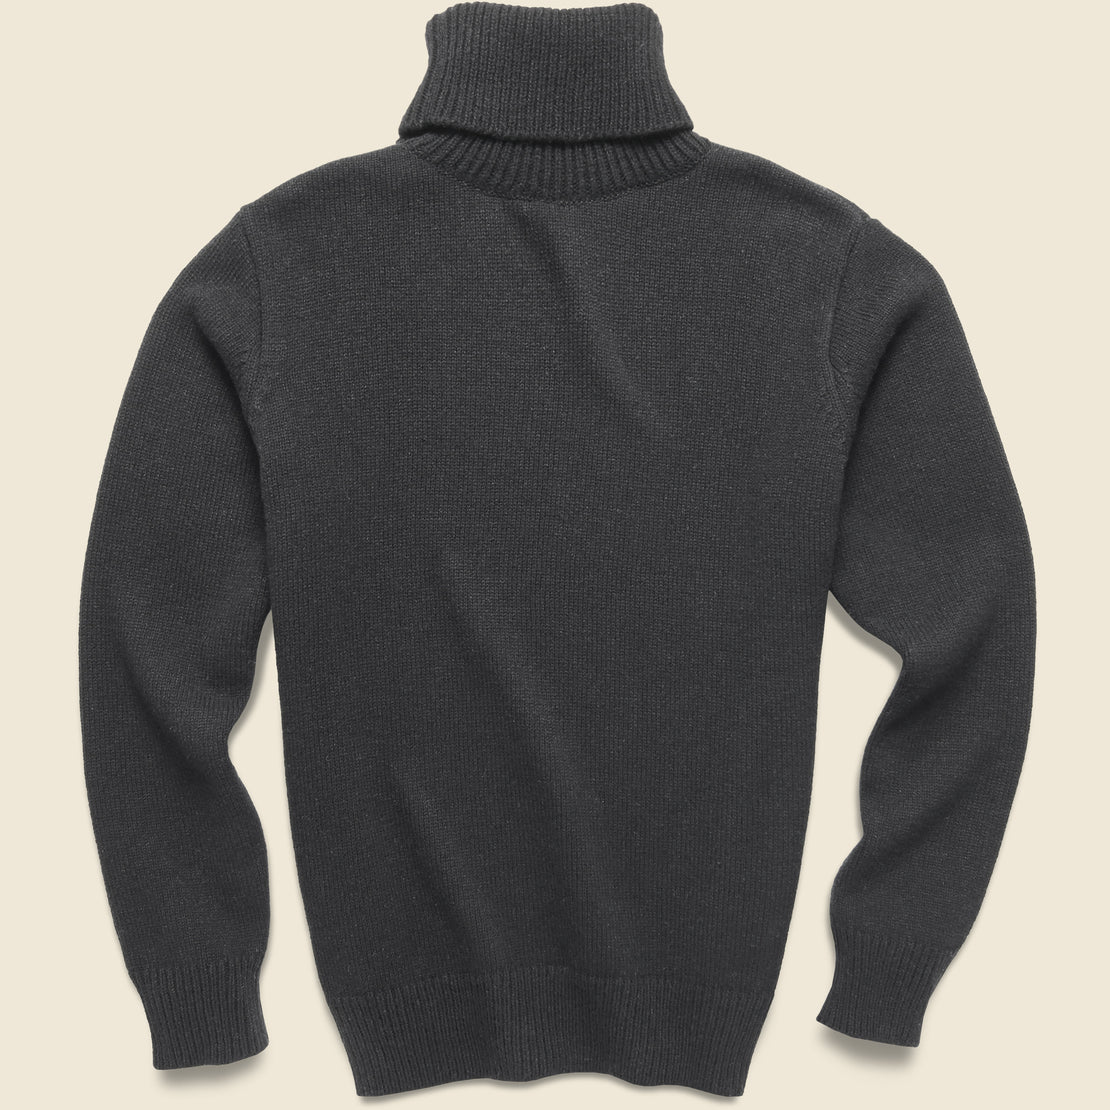 Roll Neck Sweater - Black Wool - Universal Works - STAG Provisions - Tops - Sweater